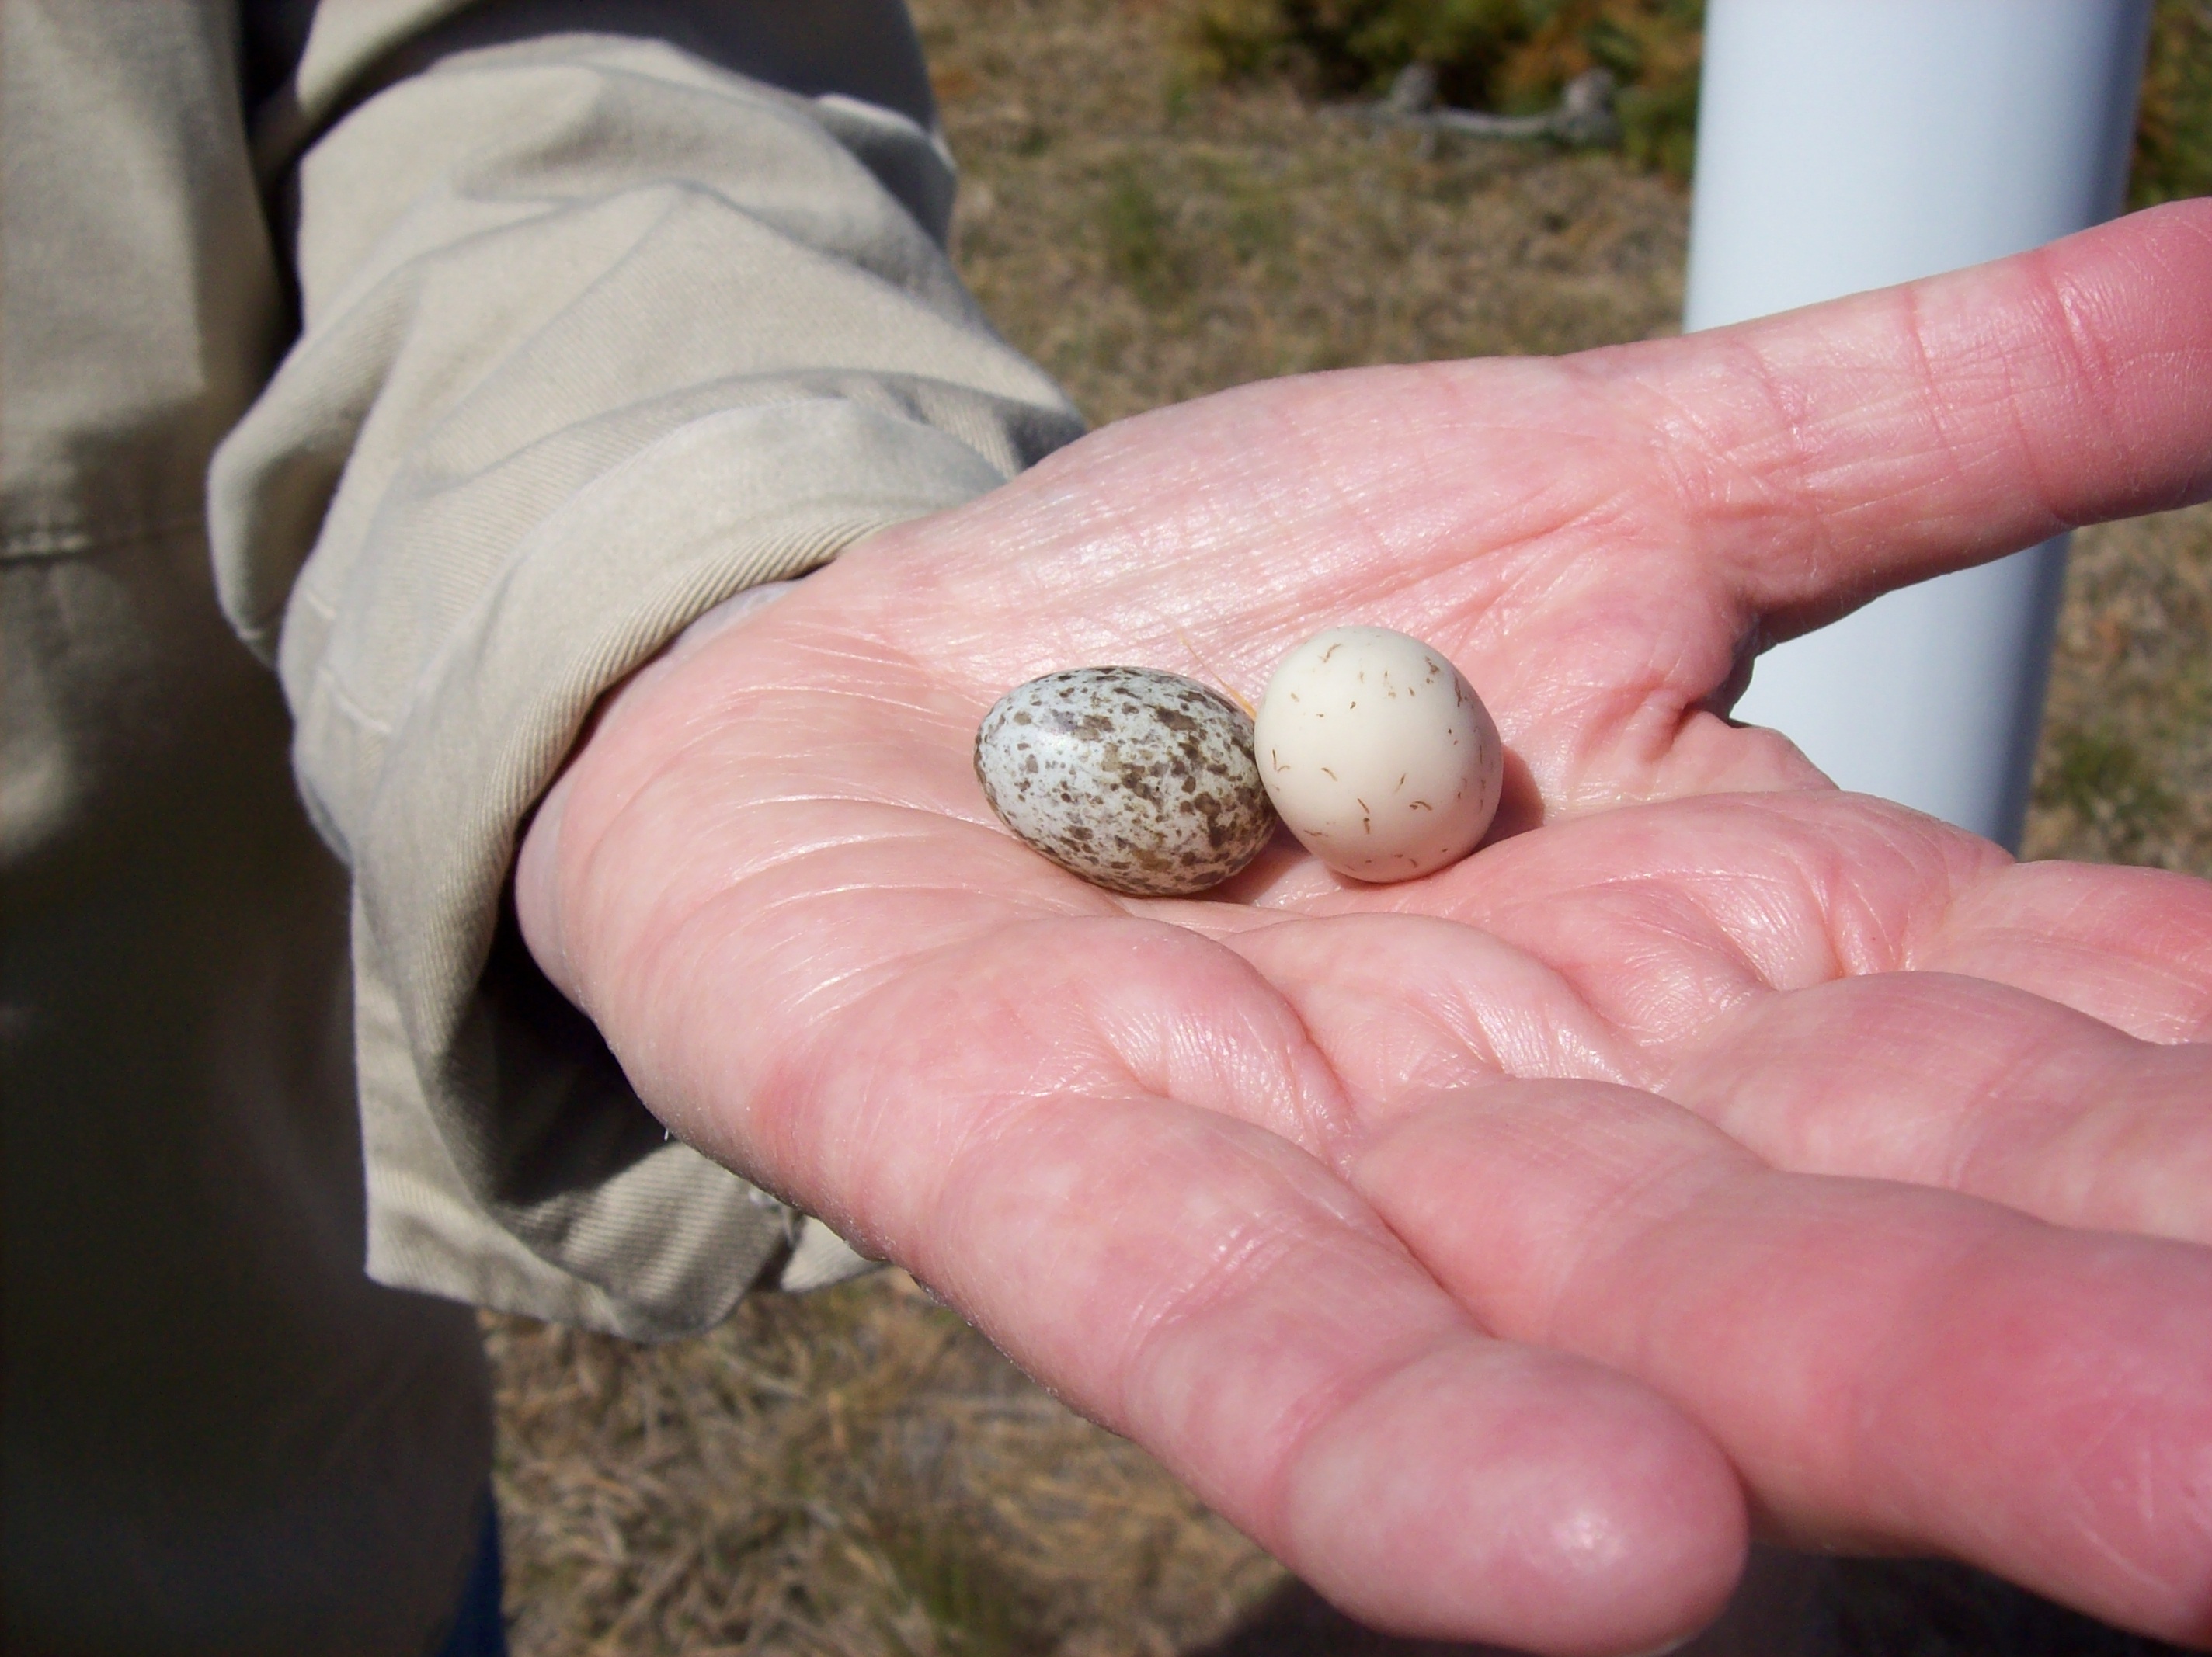 Fake house sparrow egg (right) replaces real one (left). It seems to work!